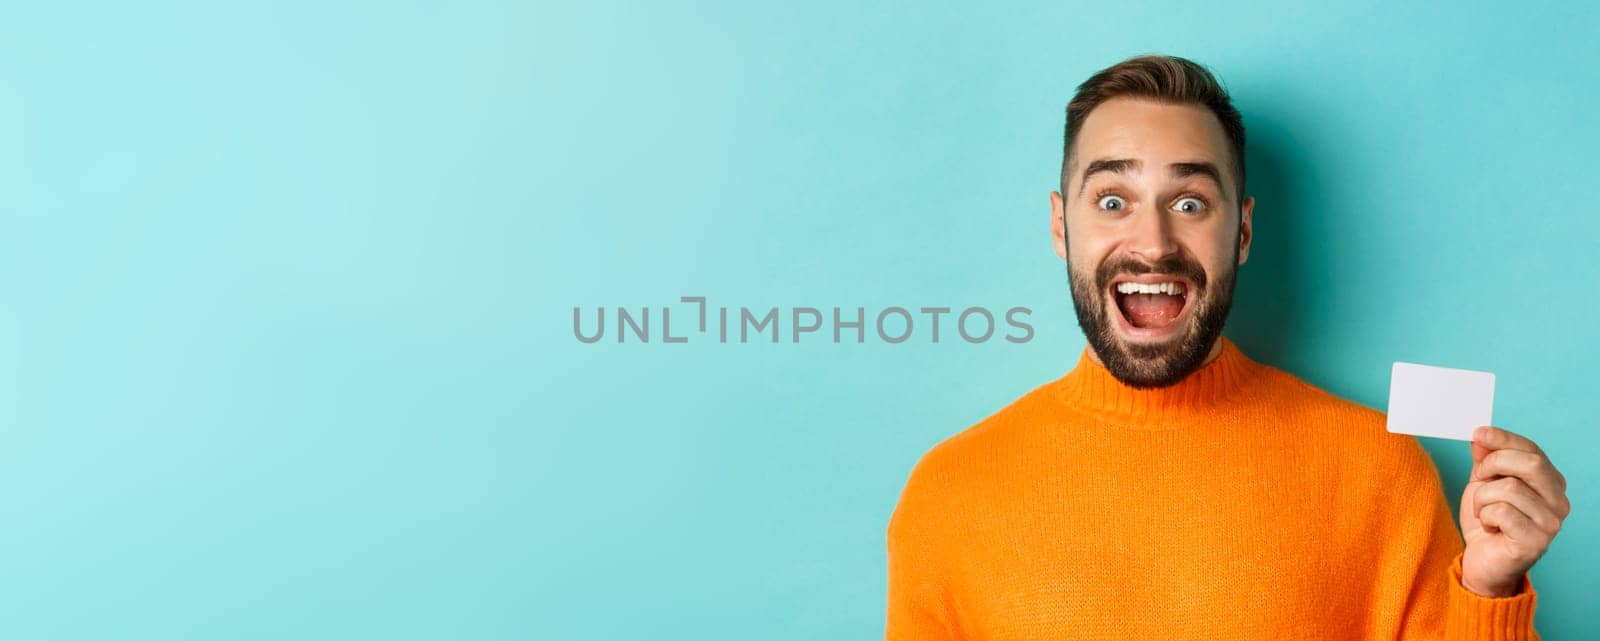 Close-up of excited caucasian man showing his credit card, smiling and staring amazed, standing in orange sweater against turquoise background.